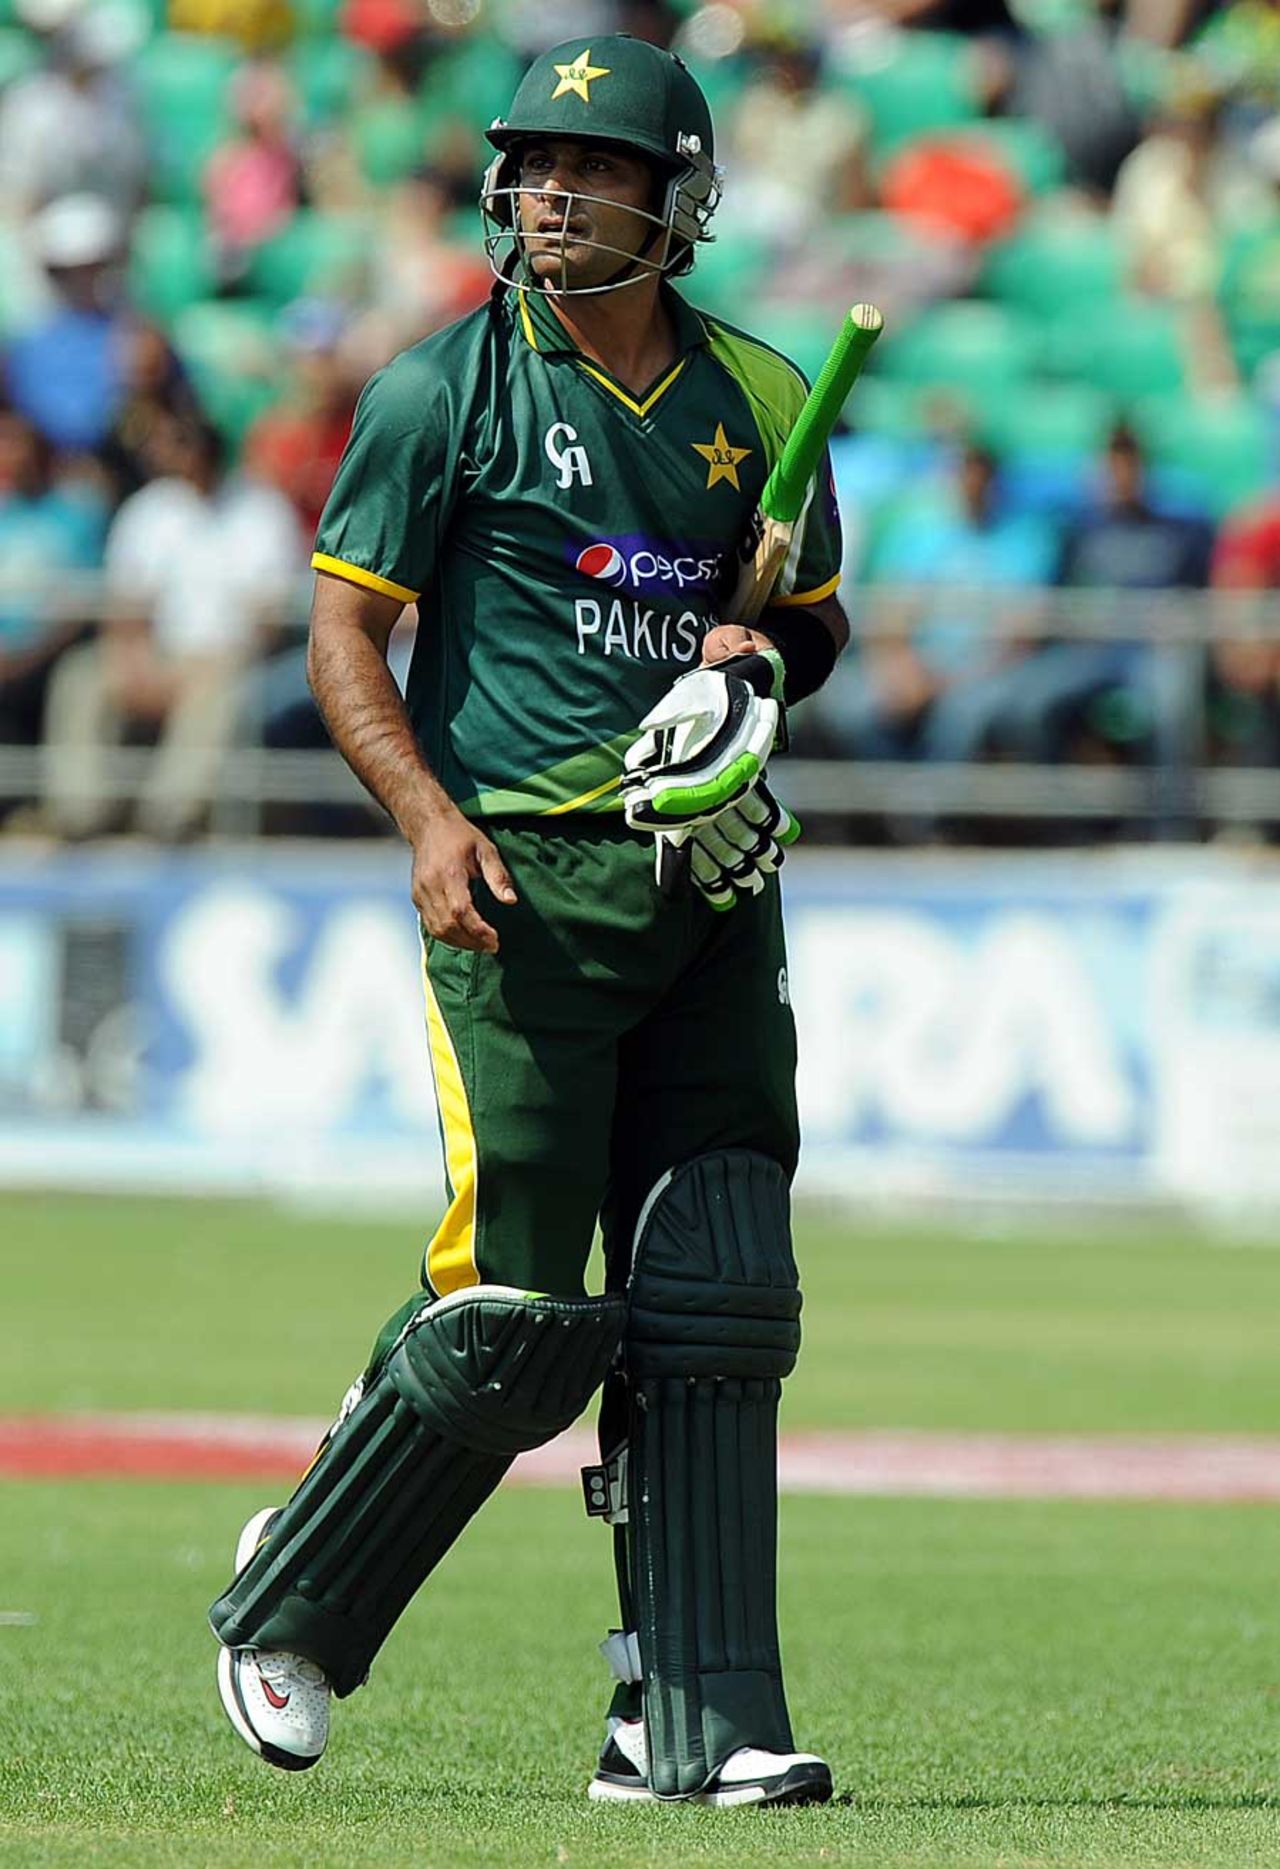 Mohammad Hafeez walks back after being dismissed, South Africa v Pakistan, 5th ODI, Benoni, March 24, 2013